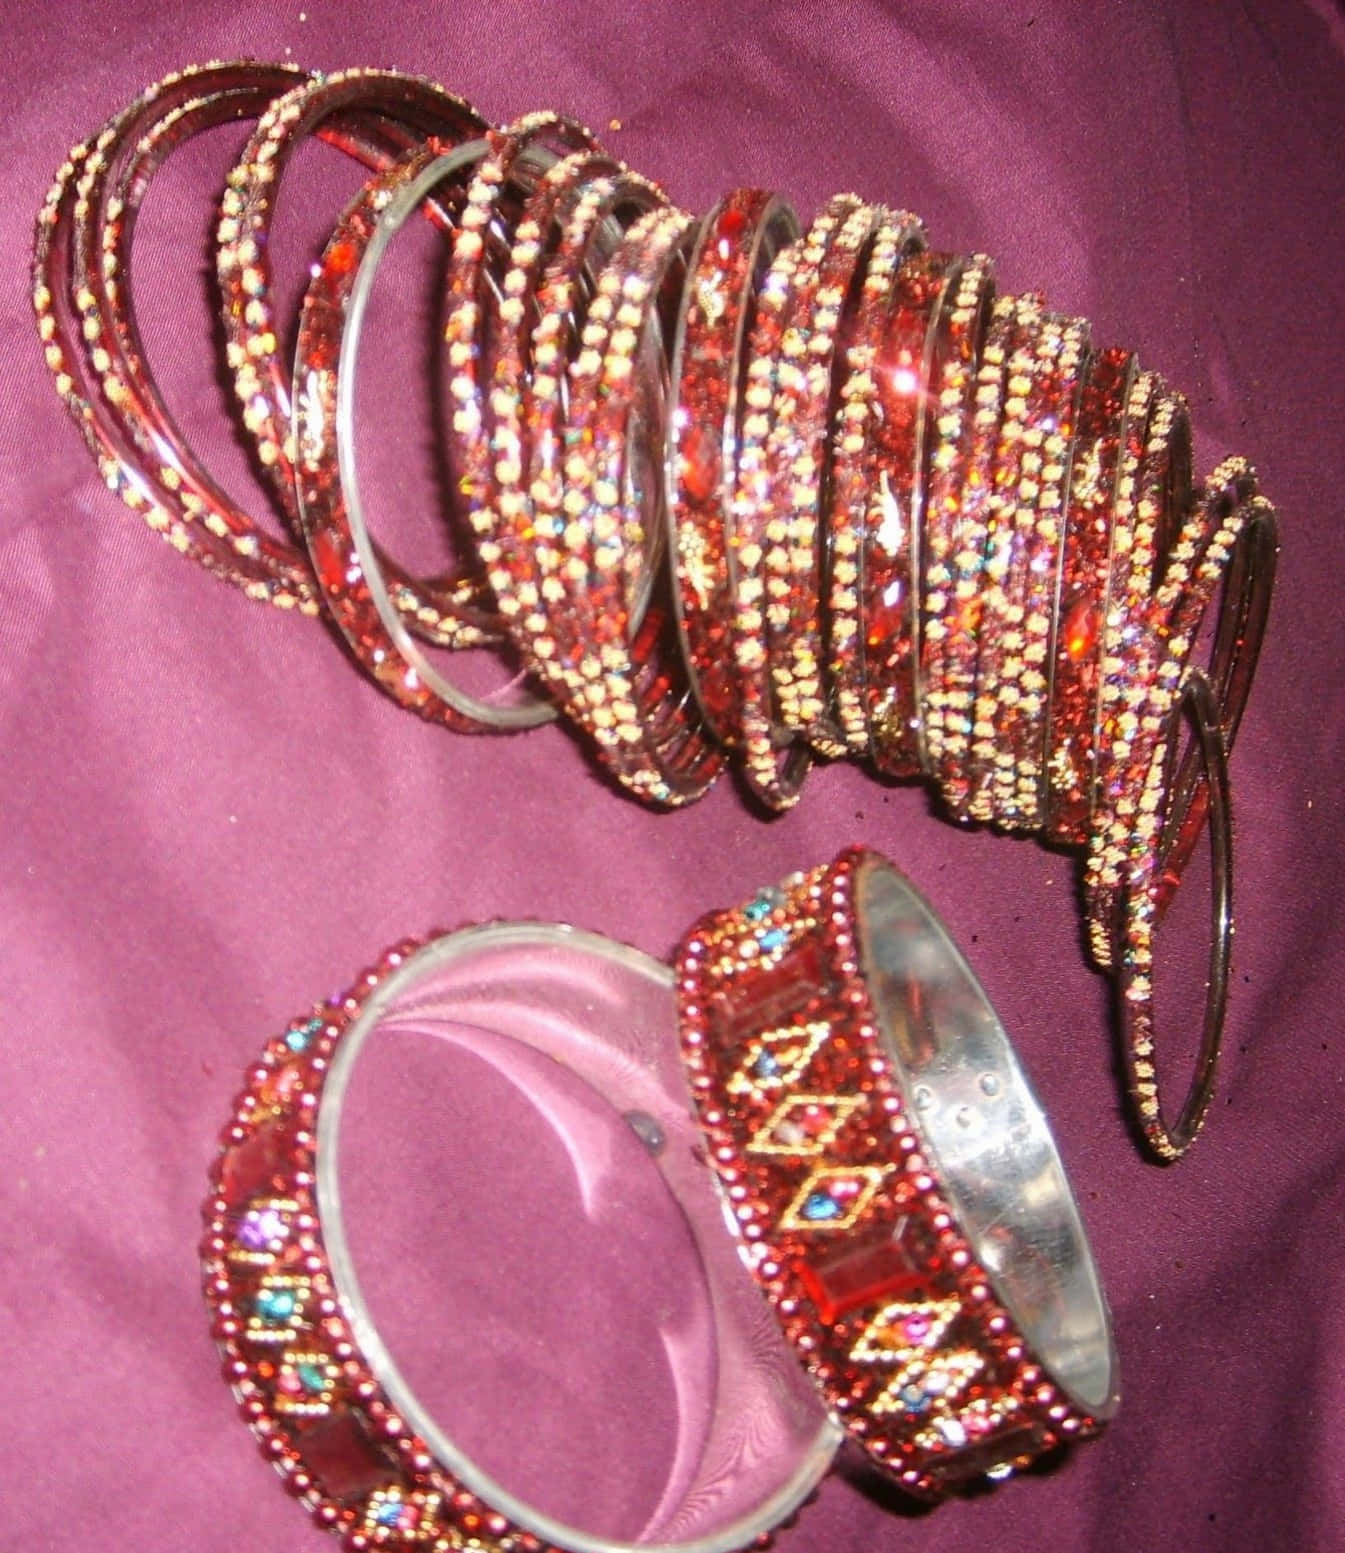 Add a sparkle to your wrists with beautiful, ethnic bangles.